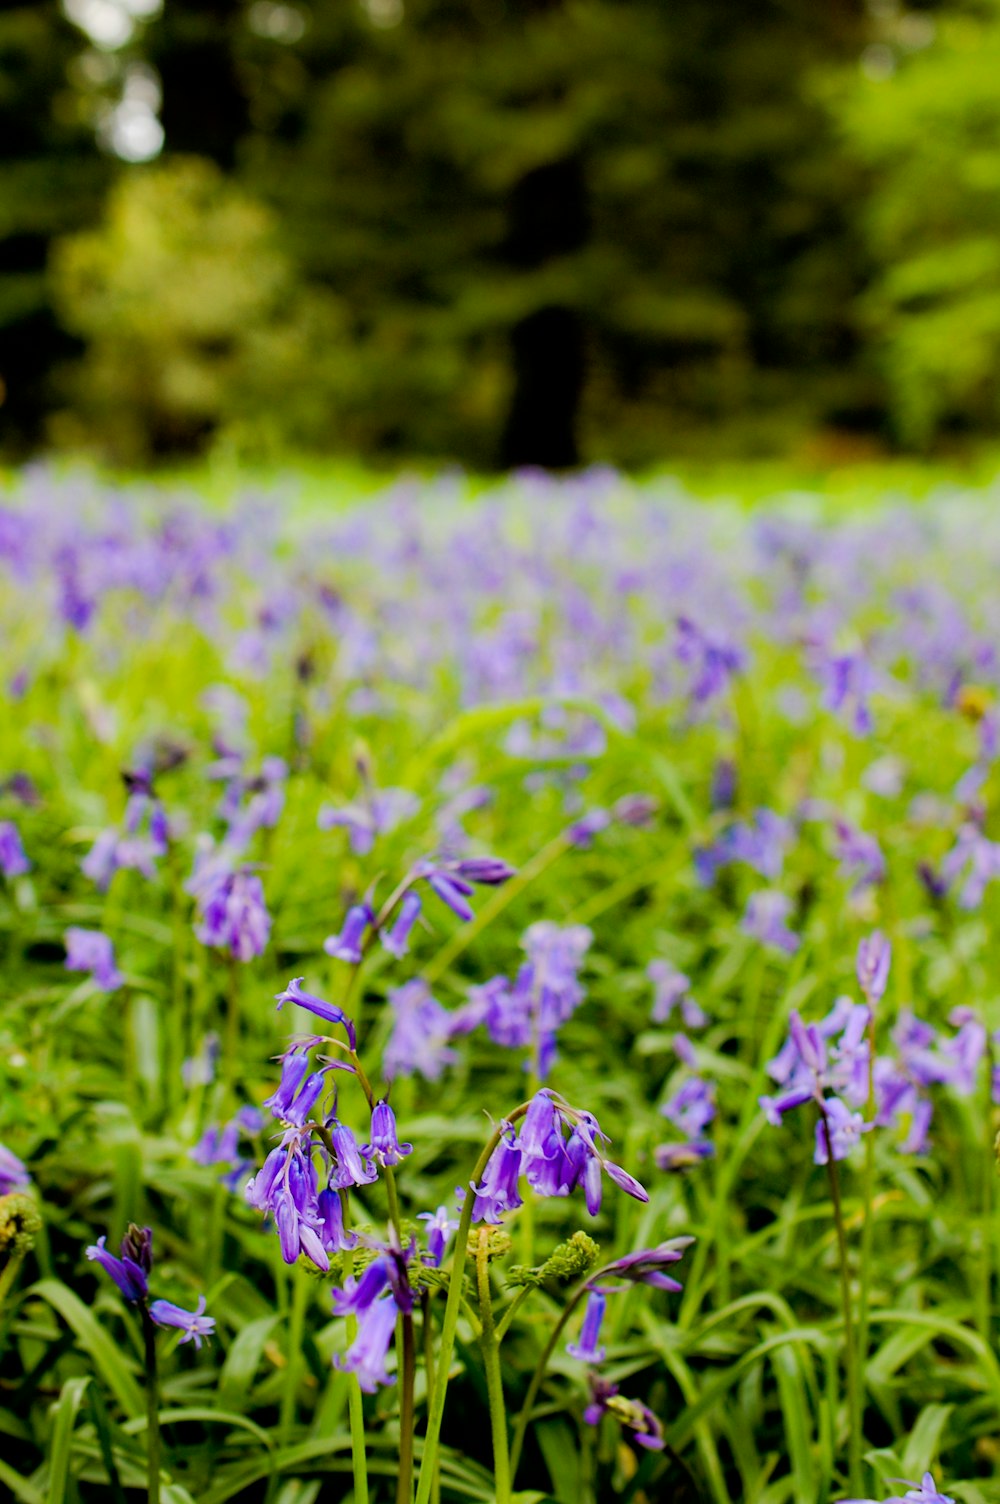 a field full of purple flowers with trees in the background